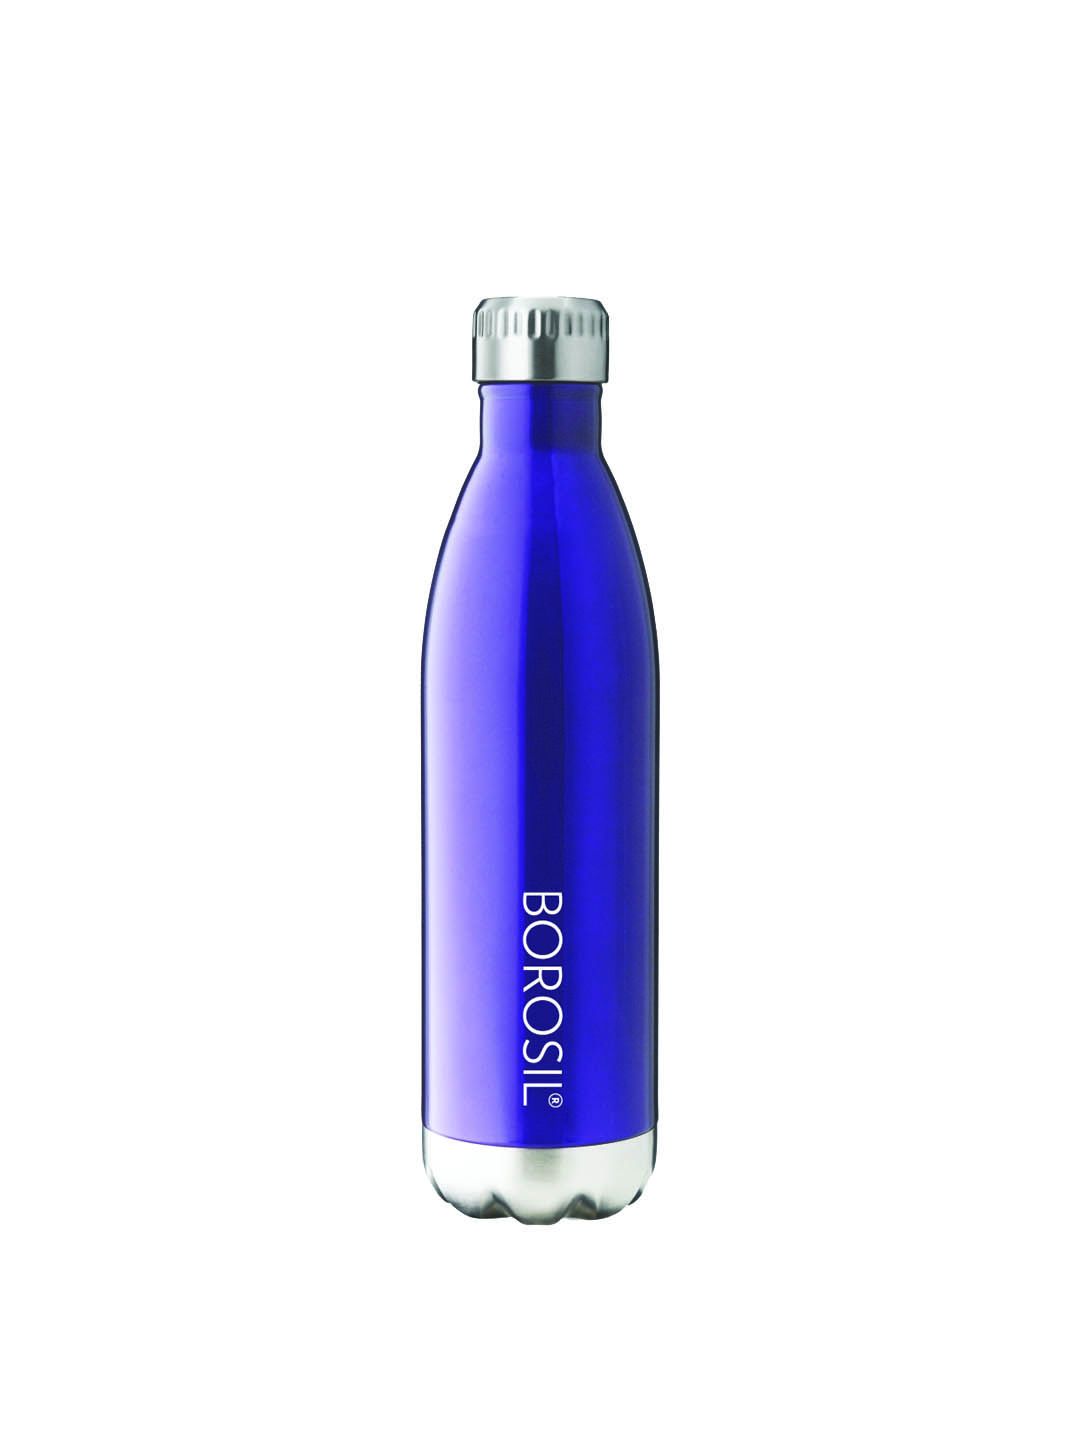 BOROSIL Hydra Bolt Solid Trans Bolt Stainless Steel Vacuum Insulated Flask Water Bottle Price in India